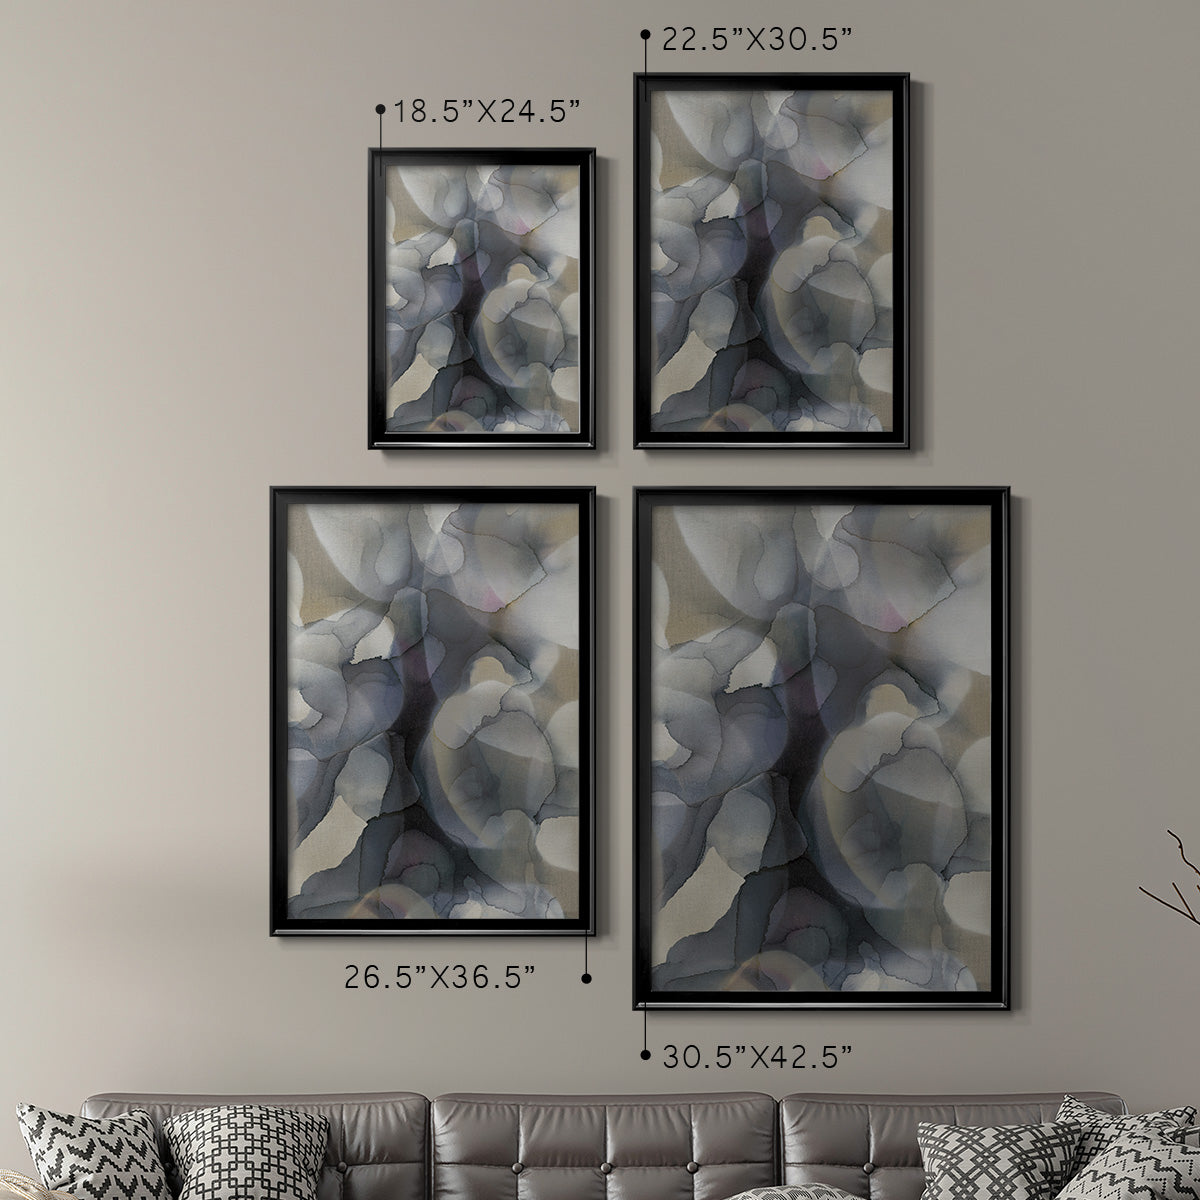 Heavy Weather Premium Framed Print - Ready to Hang